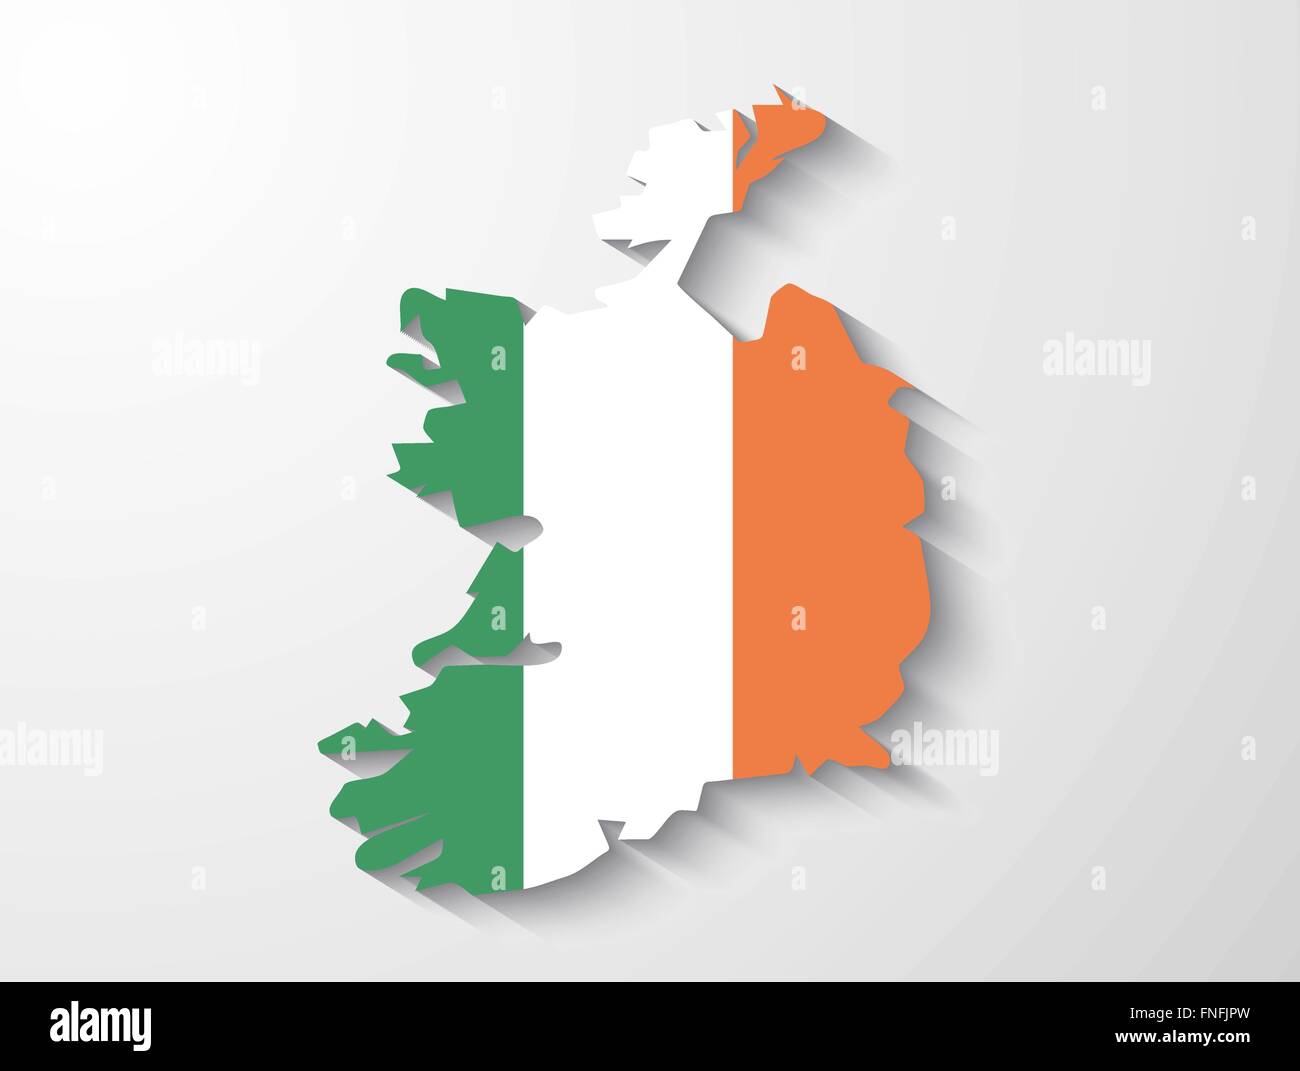 Ireland country map with flag and shadow effect presentation Stock Vector